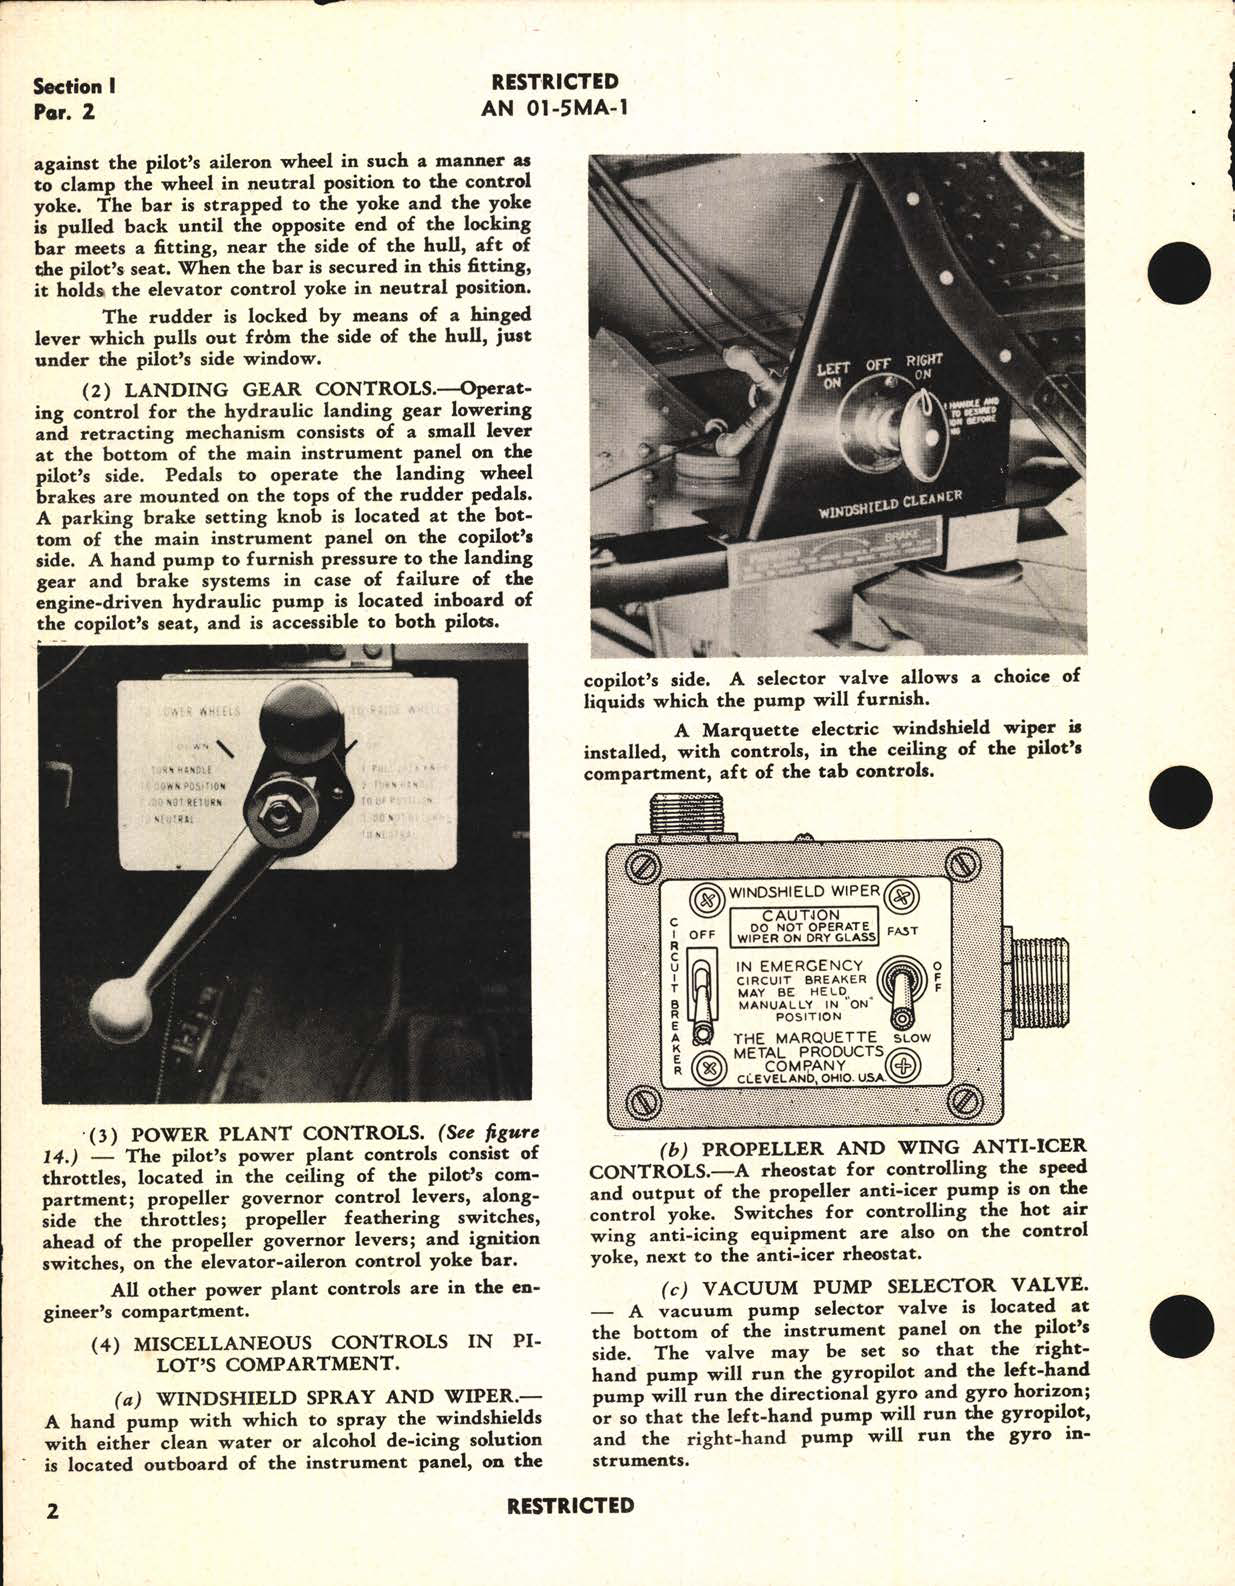 Sample page 6 from AirCorps Library document: Pilot's Flight Operating Instructions for PBY-5A Airplanes